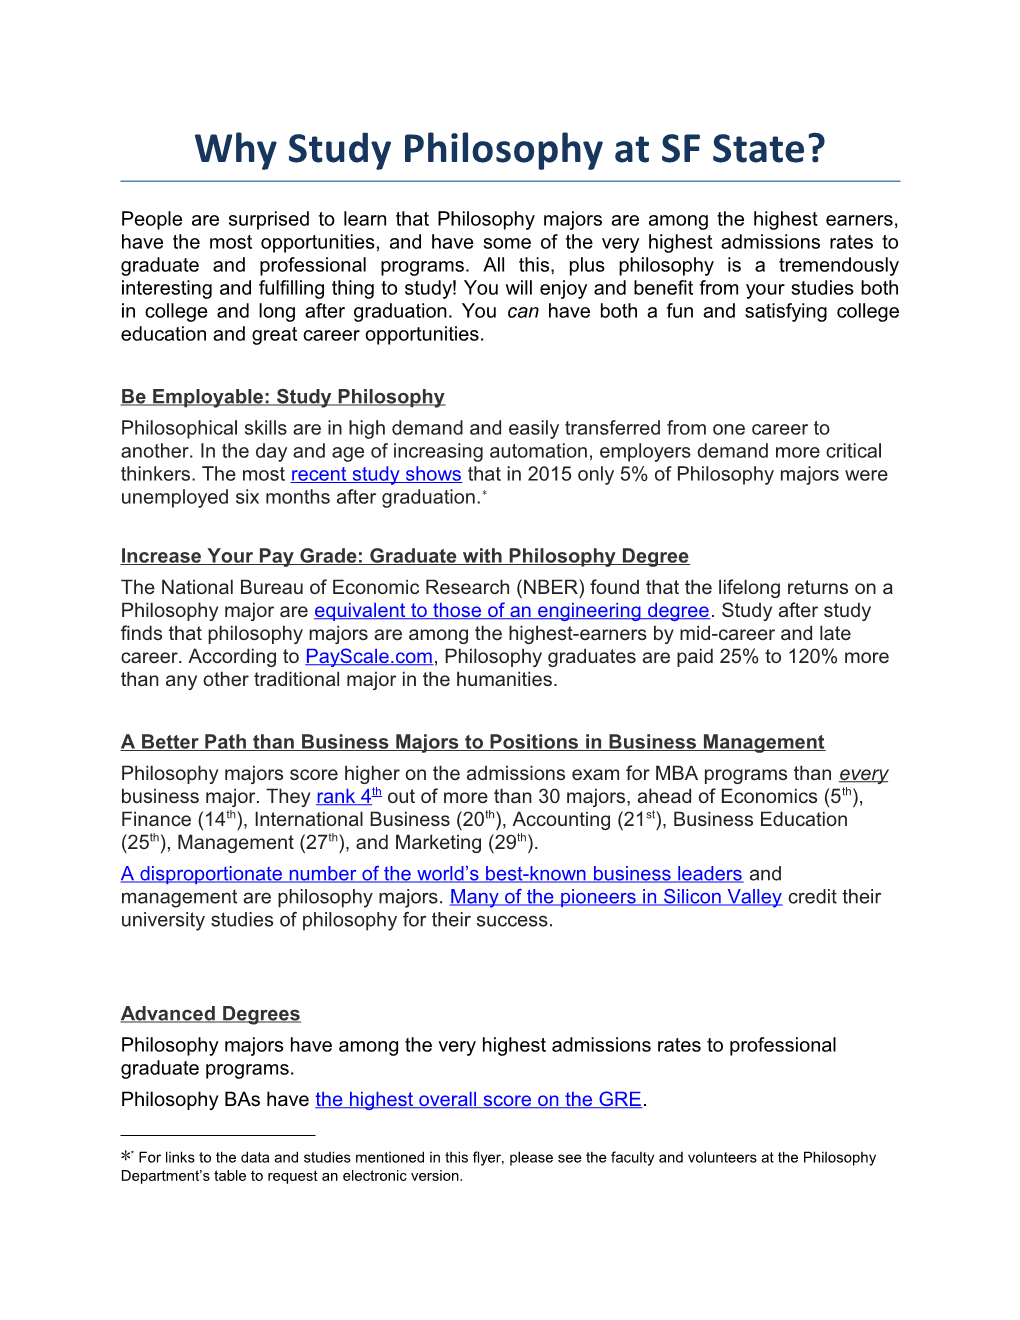 Why Study Philosophy at SF State?